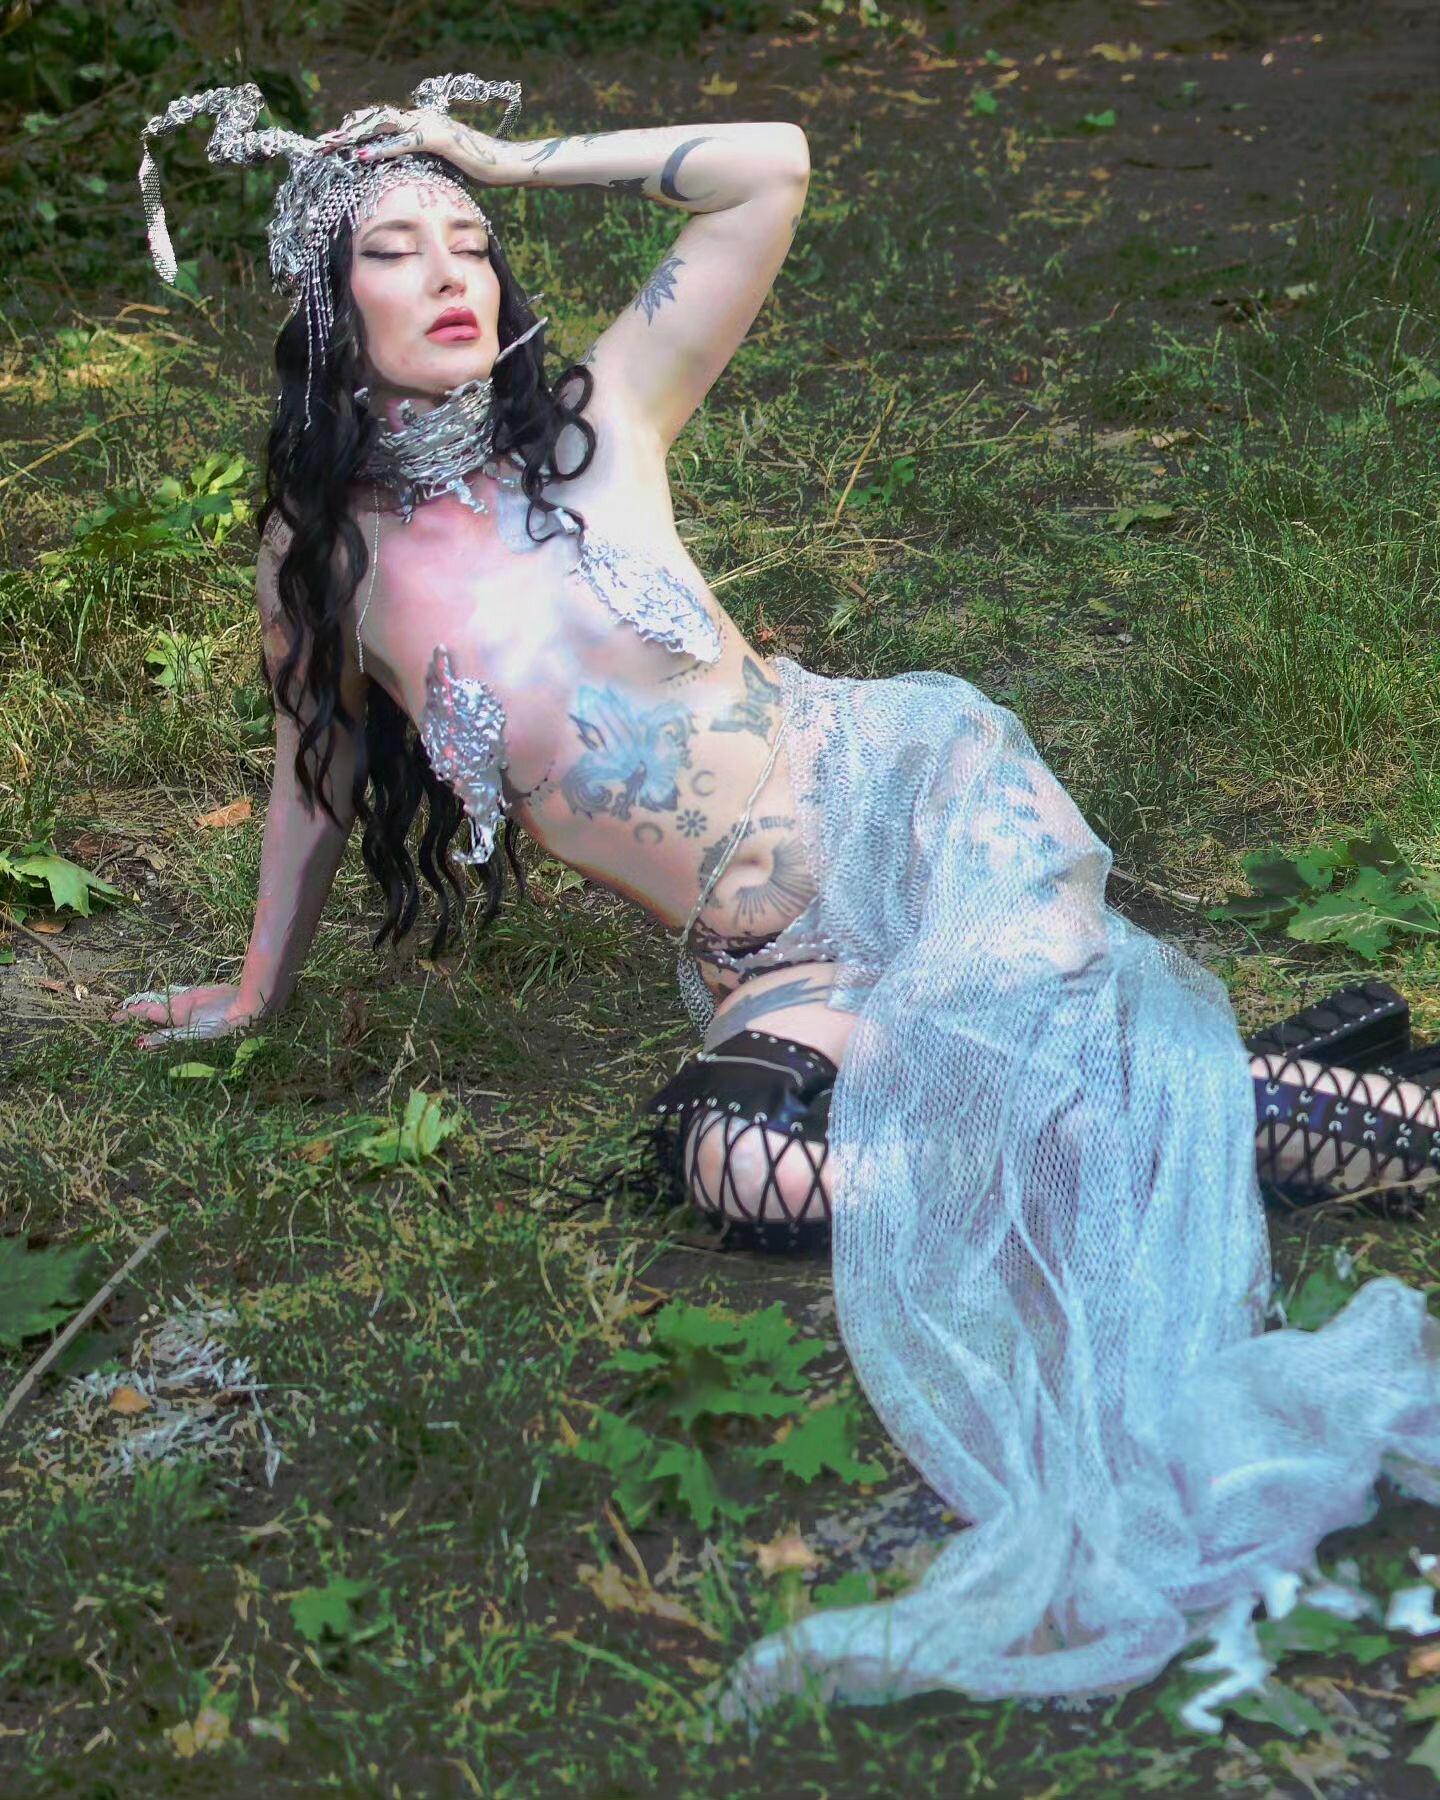 Here a preview #shotbysucci 📸 of my new art series &quot;Divinit&eacute;s&quot; aka goddess in french 🙏👑 @louvedudiable.ink ⚔🥰 - I made it all : crown to the style &amp; photo to the #colorediting.
MUAH by the one &amp; only @santamarijuanna 🎀

